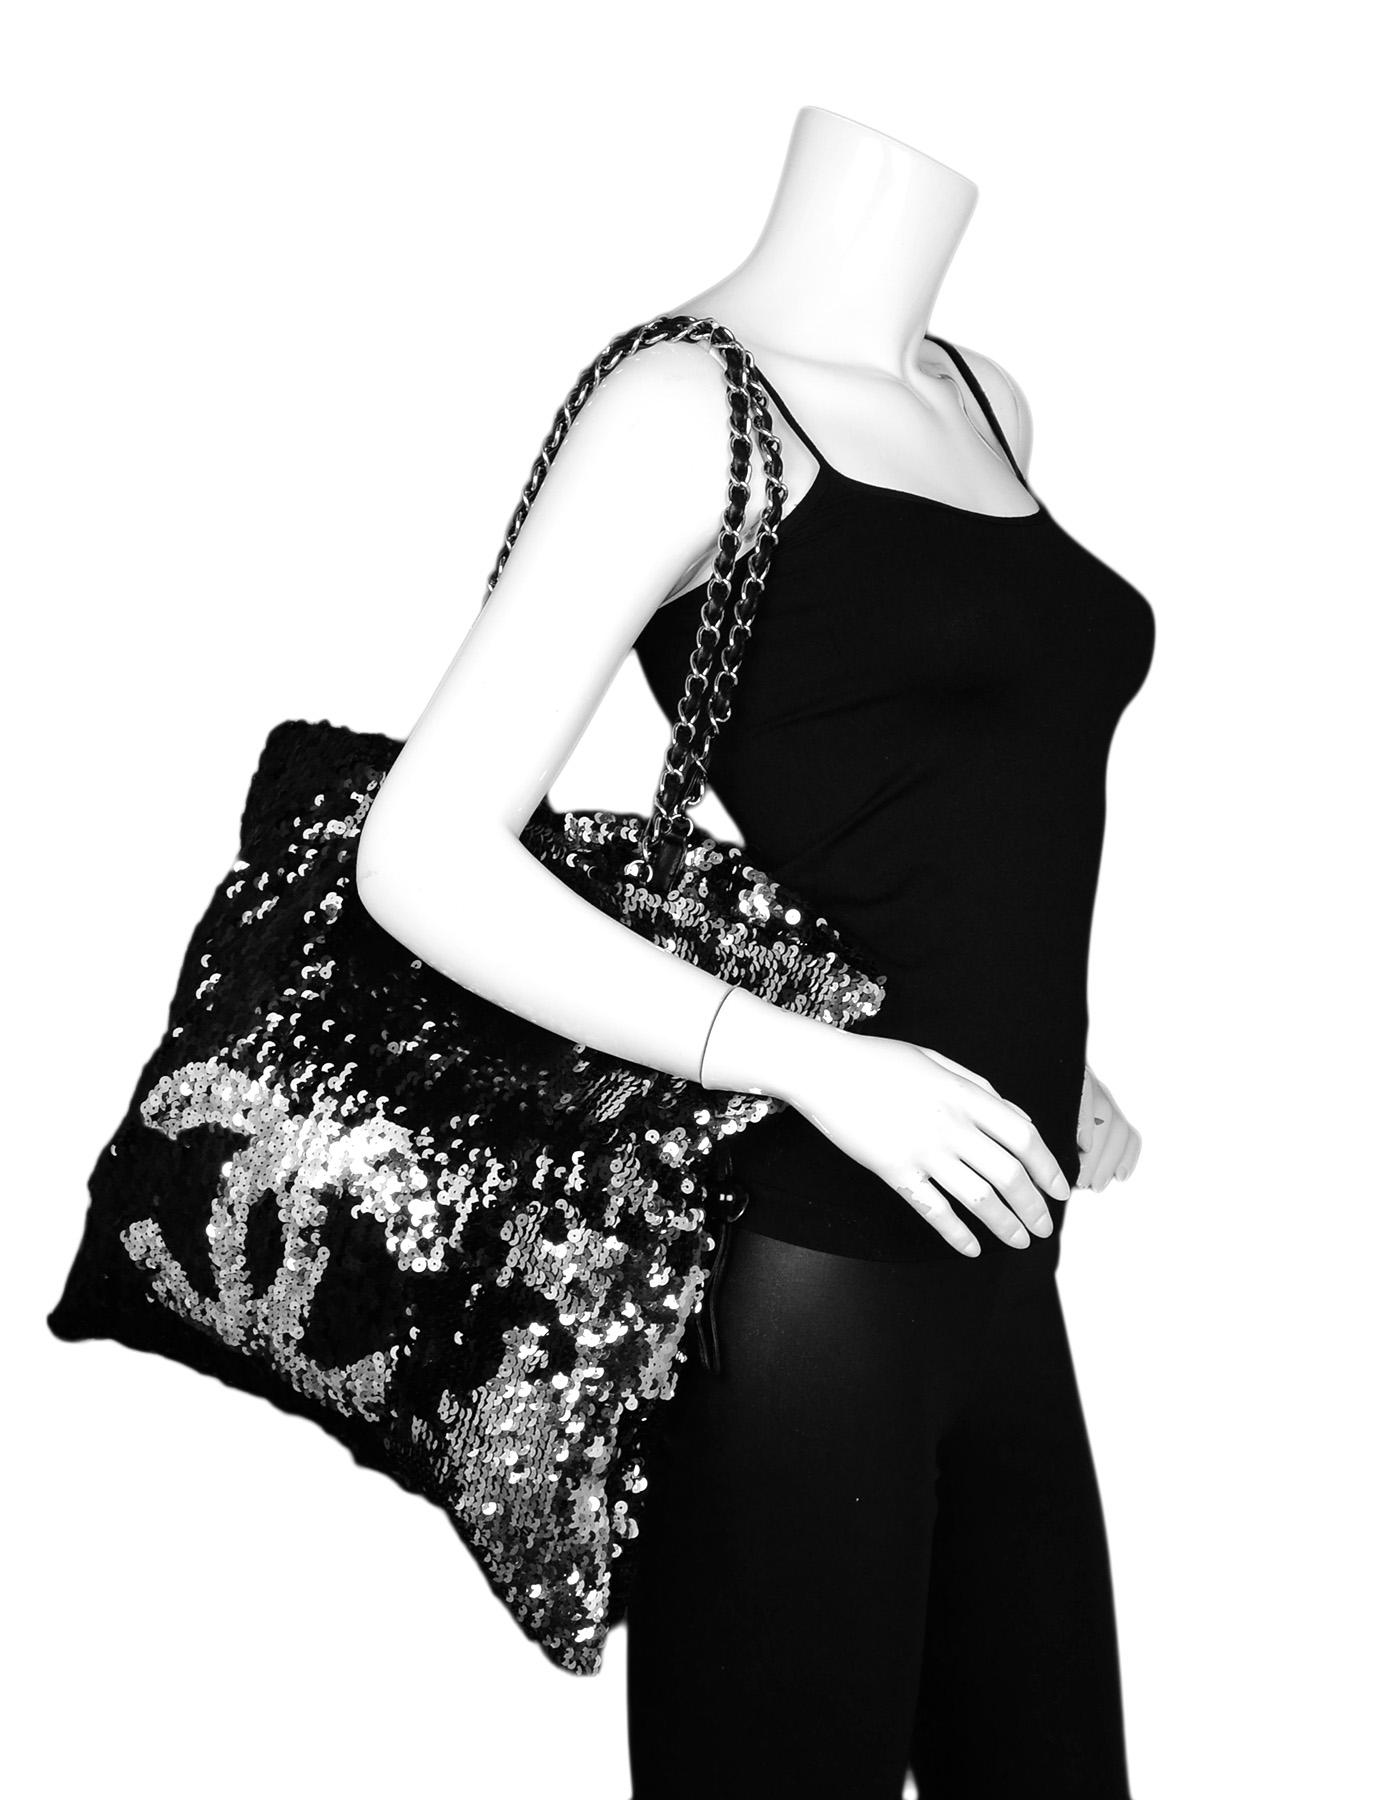 Chanel Black/Silver Sequin Summer Night Drawstring Tote Bag

Made In: Italy
Year of Production: 2008 - 2009
Color: Black/silver
Hardware: Silvertone
Materials: Sequin, leather, metal
Lining: Black satin
Closure/Opening: Open top with magnetic